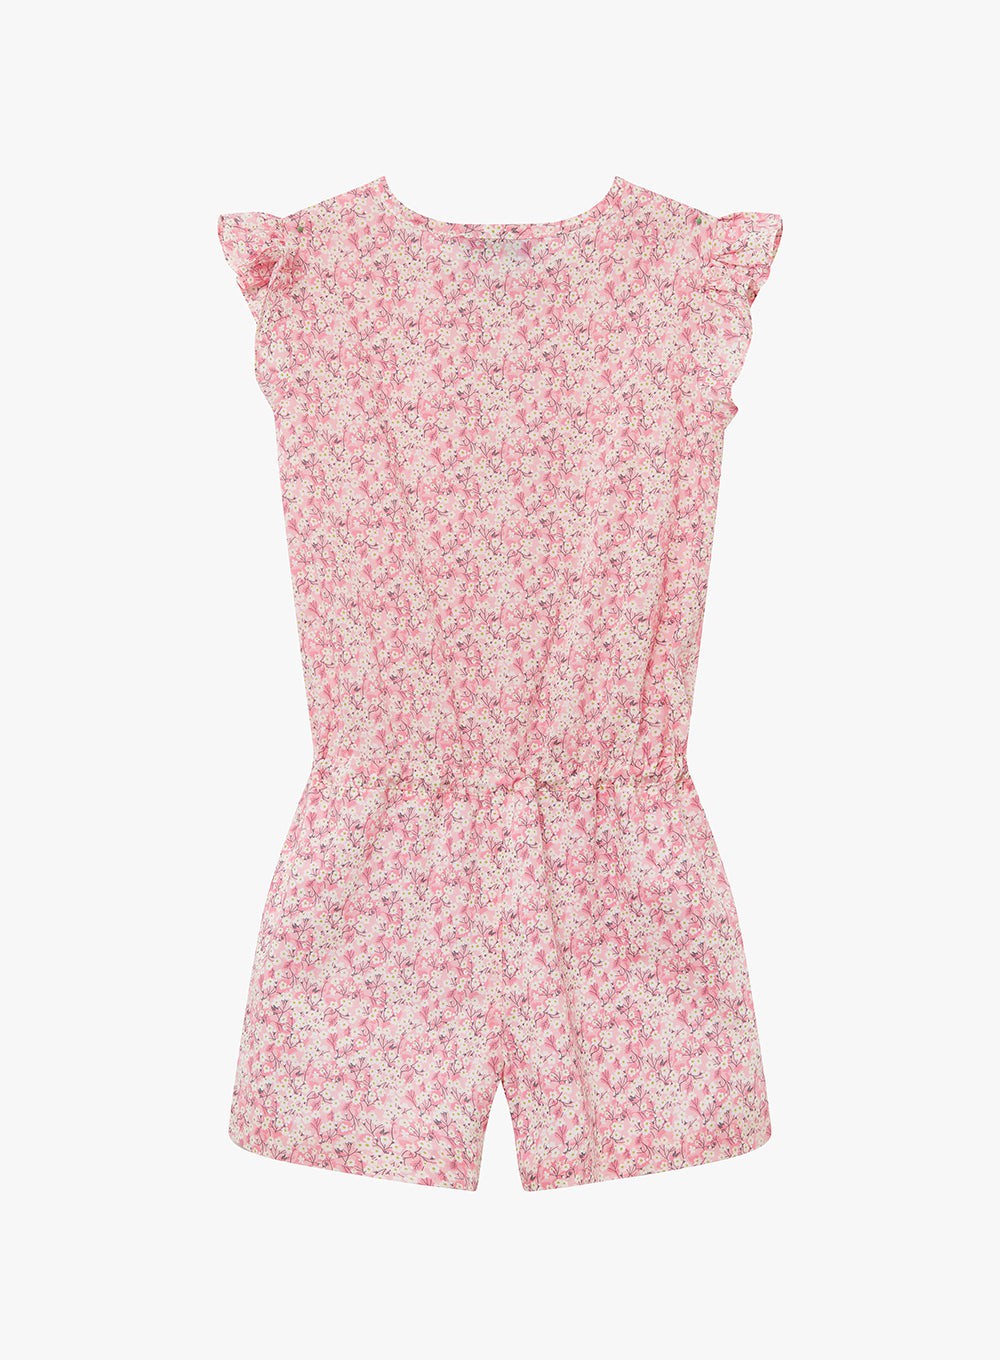 Lily Rose Playsuit Blossom Playsuit